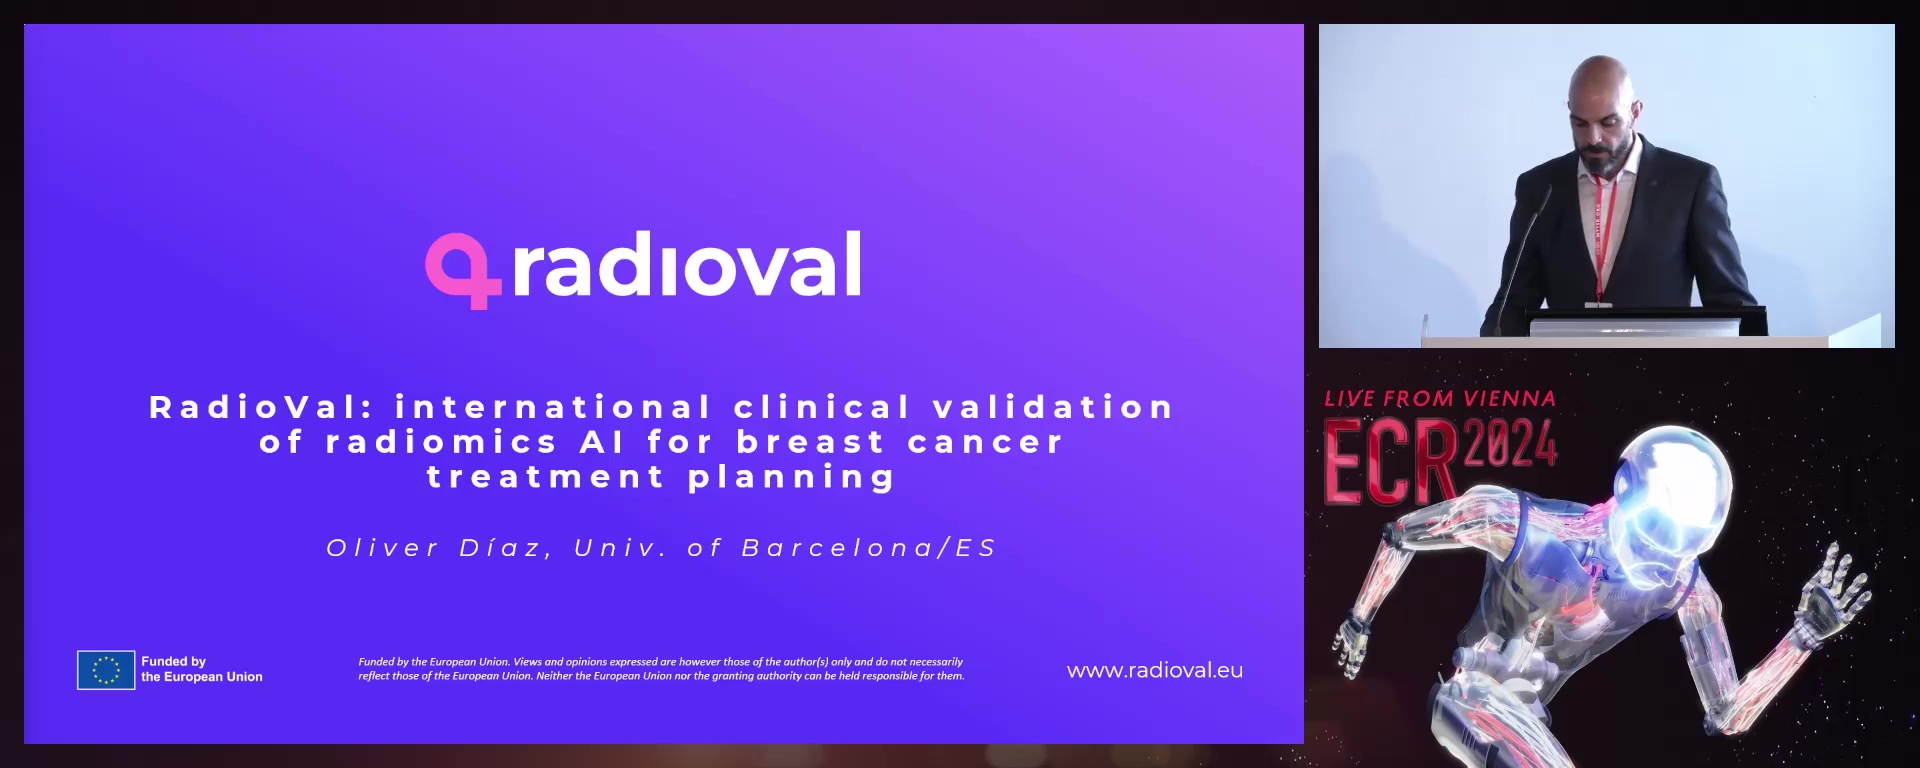 RadioVal: international clinical validation of radiomics AI for breast cancer treatment planning